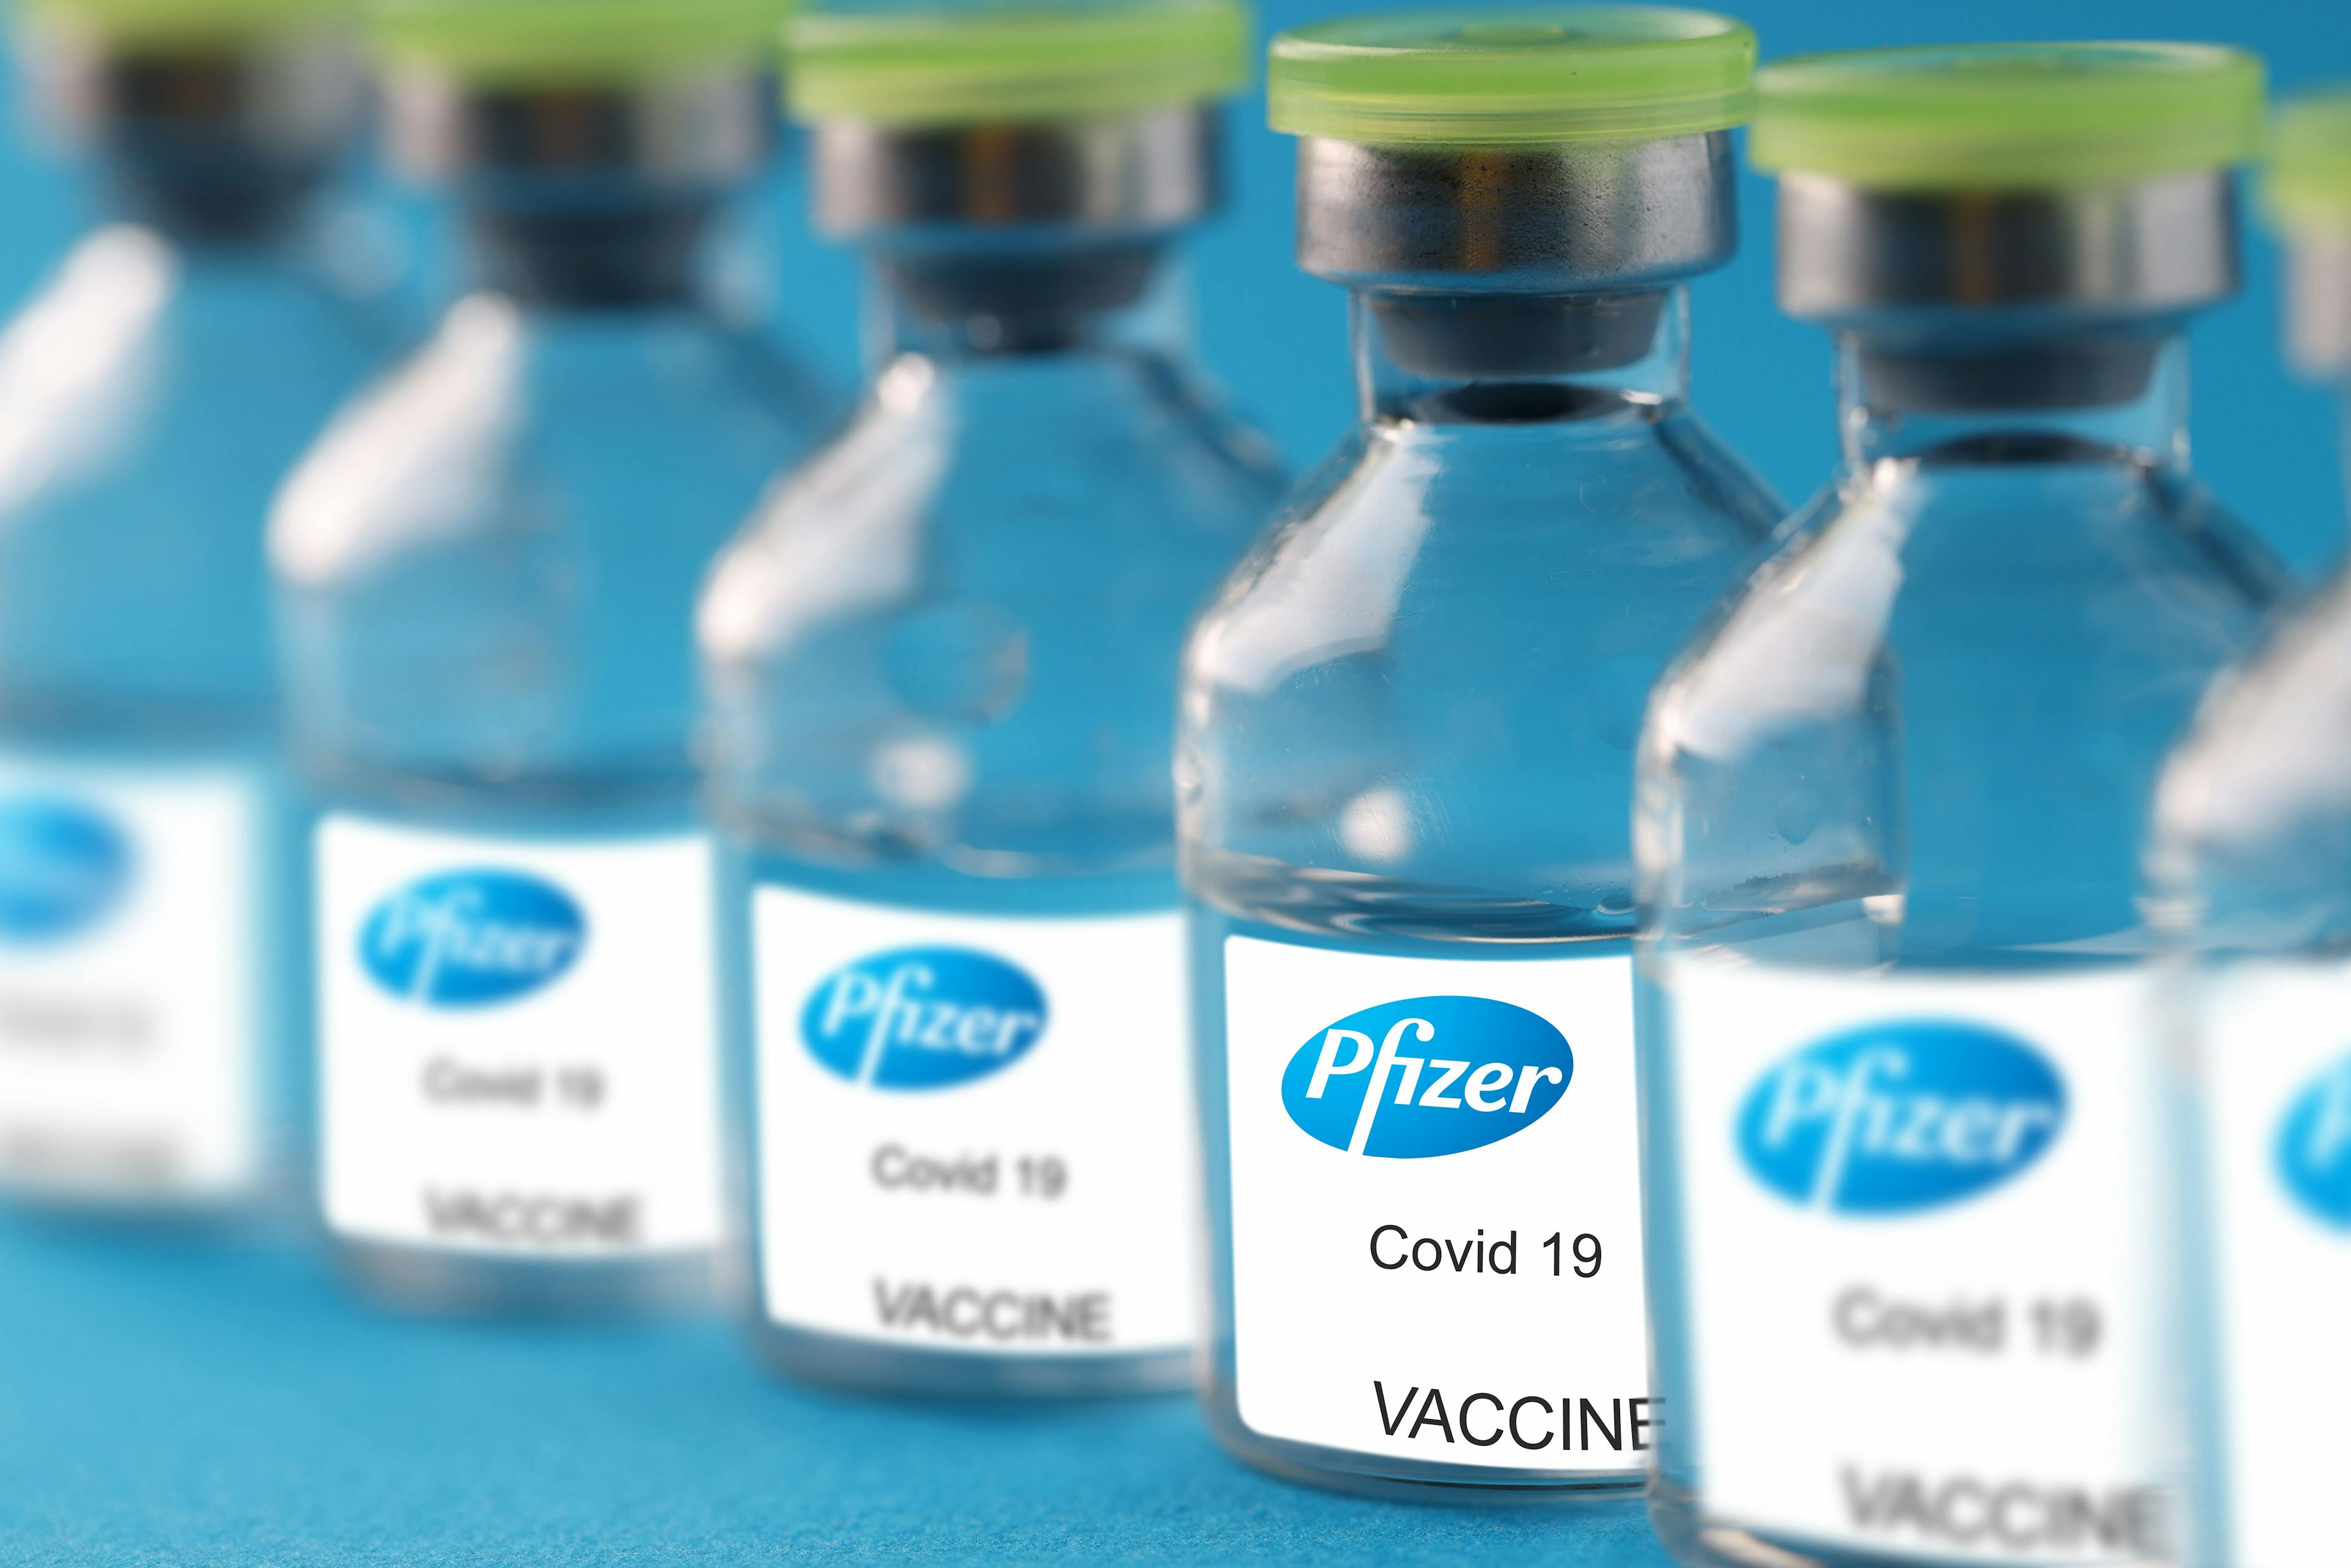 Pfizer-BioNTech Covid vaccine receives long-awaited FDA approval